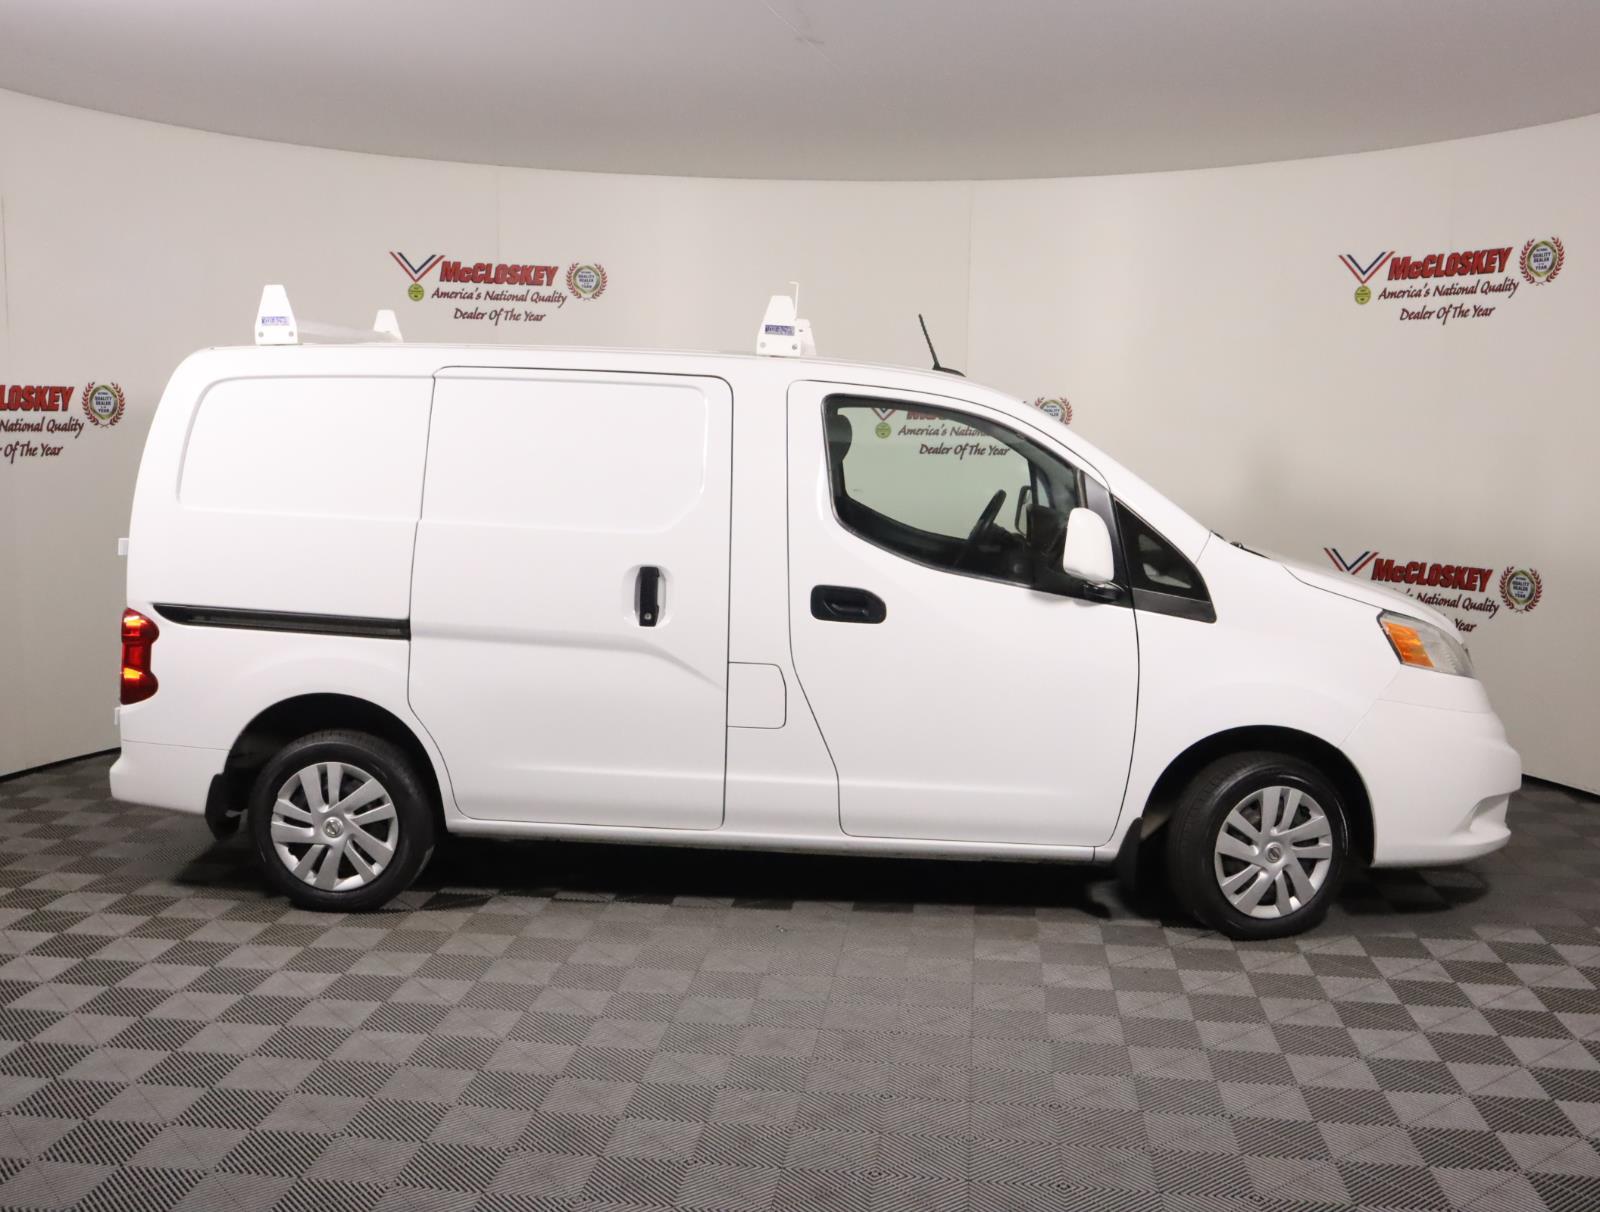 Preowned 2019 NISSAN NV200 NEW BRAKES AND TIRES! for sale by McCloskey Imports & 4X4's in Colorado Springs, CO